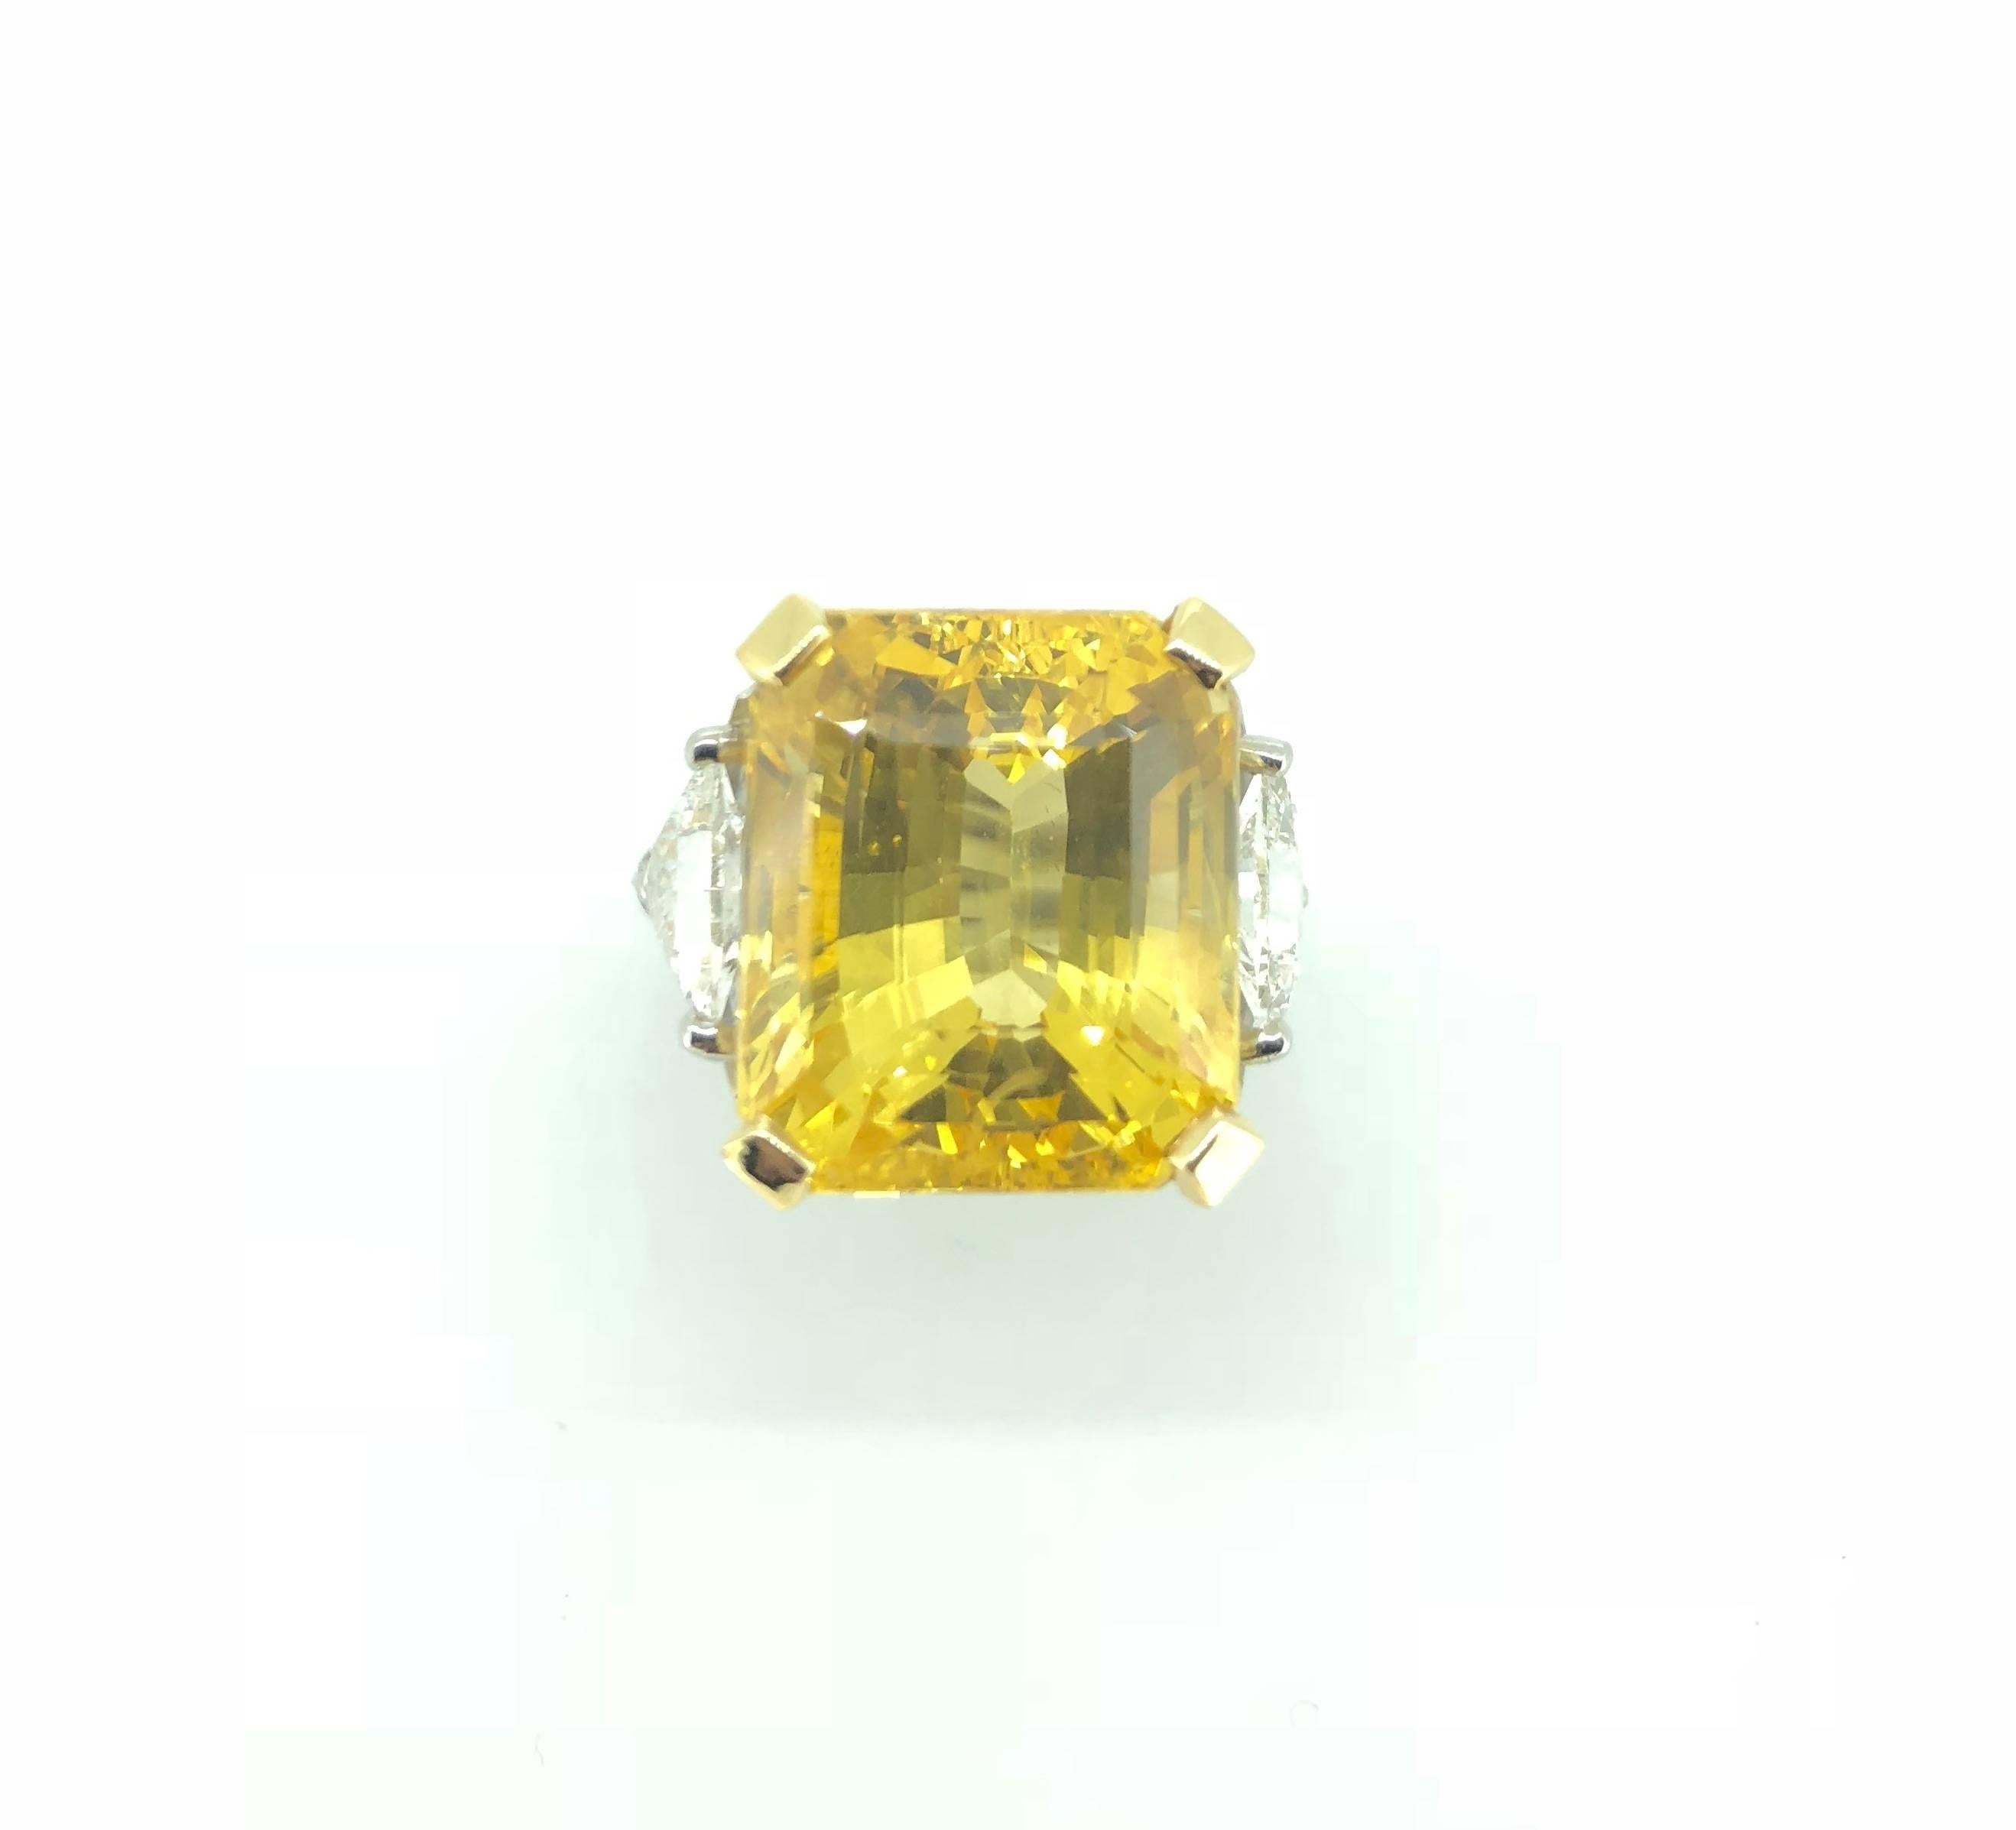 A Vivid Natural Yellow Sapphire Emerald Cut 20.01 Carats Mounted in 18K Yellow Gold and Platinum Ring. 

The Central Emerald Cut Yellow Sapphire is flanked by two Triangle-cut diamonds total 0.98 Carats, sweeping gracefully either side by round